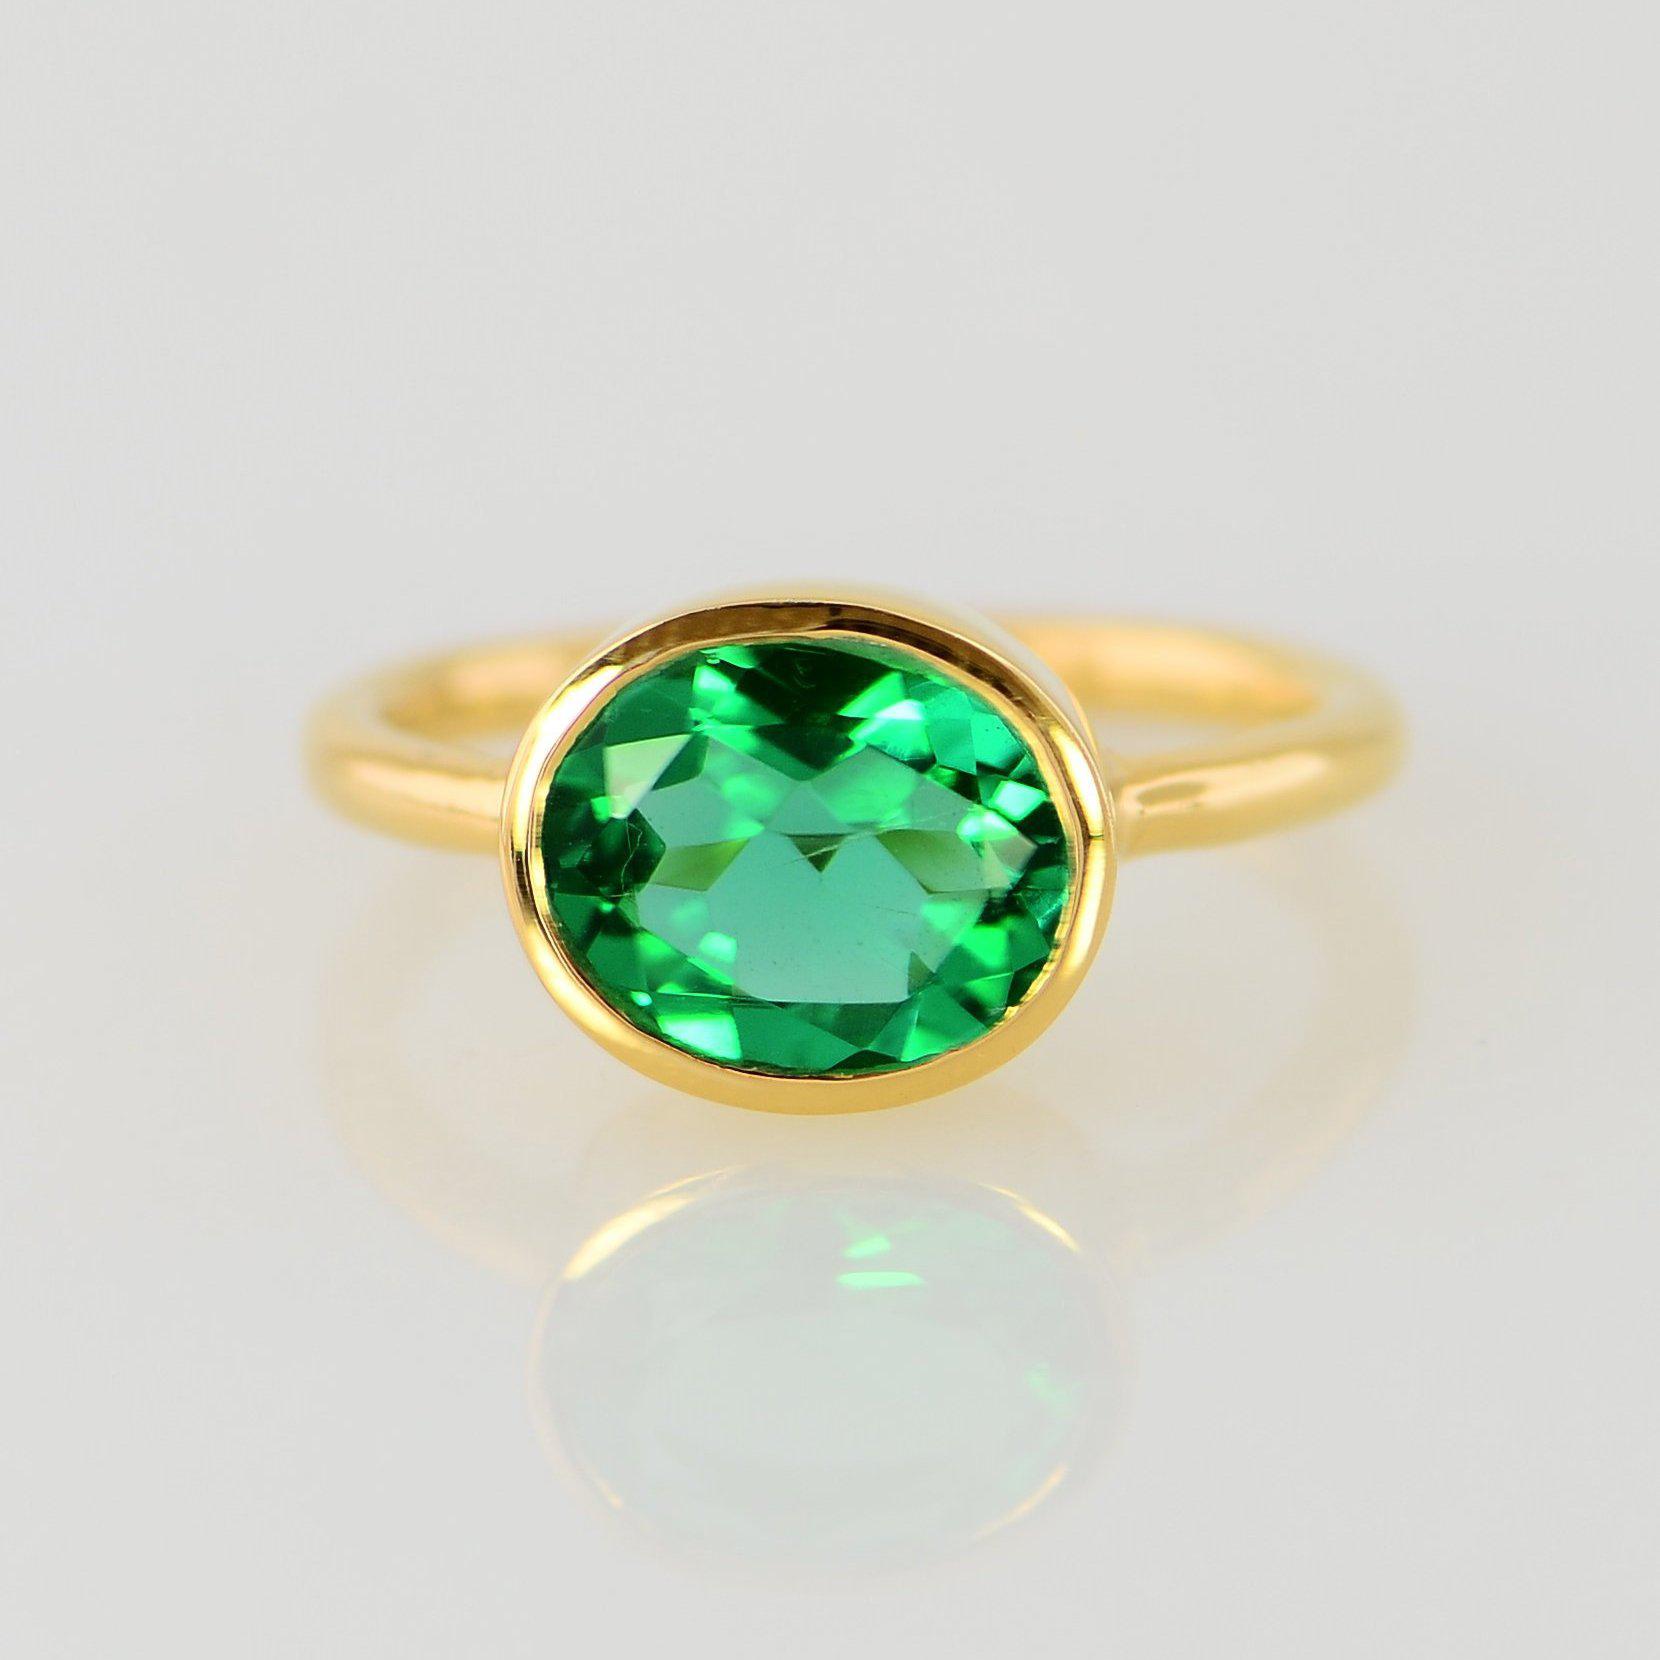 Green Emerald Quartz Oval Cut Ring, Solitaire Ring, Gems Ring, Gemstone Quartz Ring, Green Gemstone Ring, Stackable ring, Stacking Ring